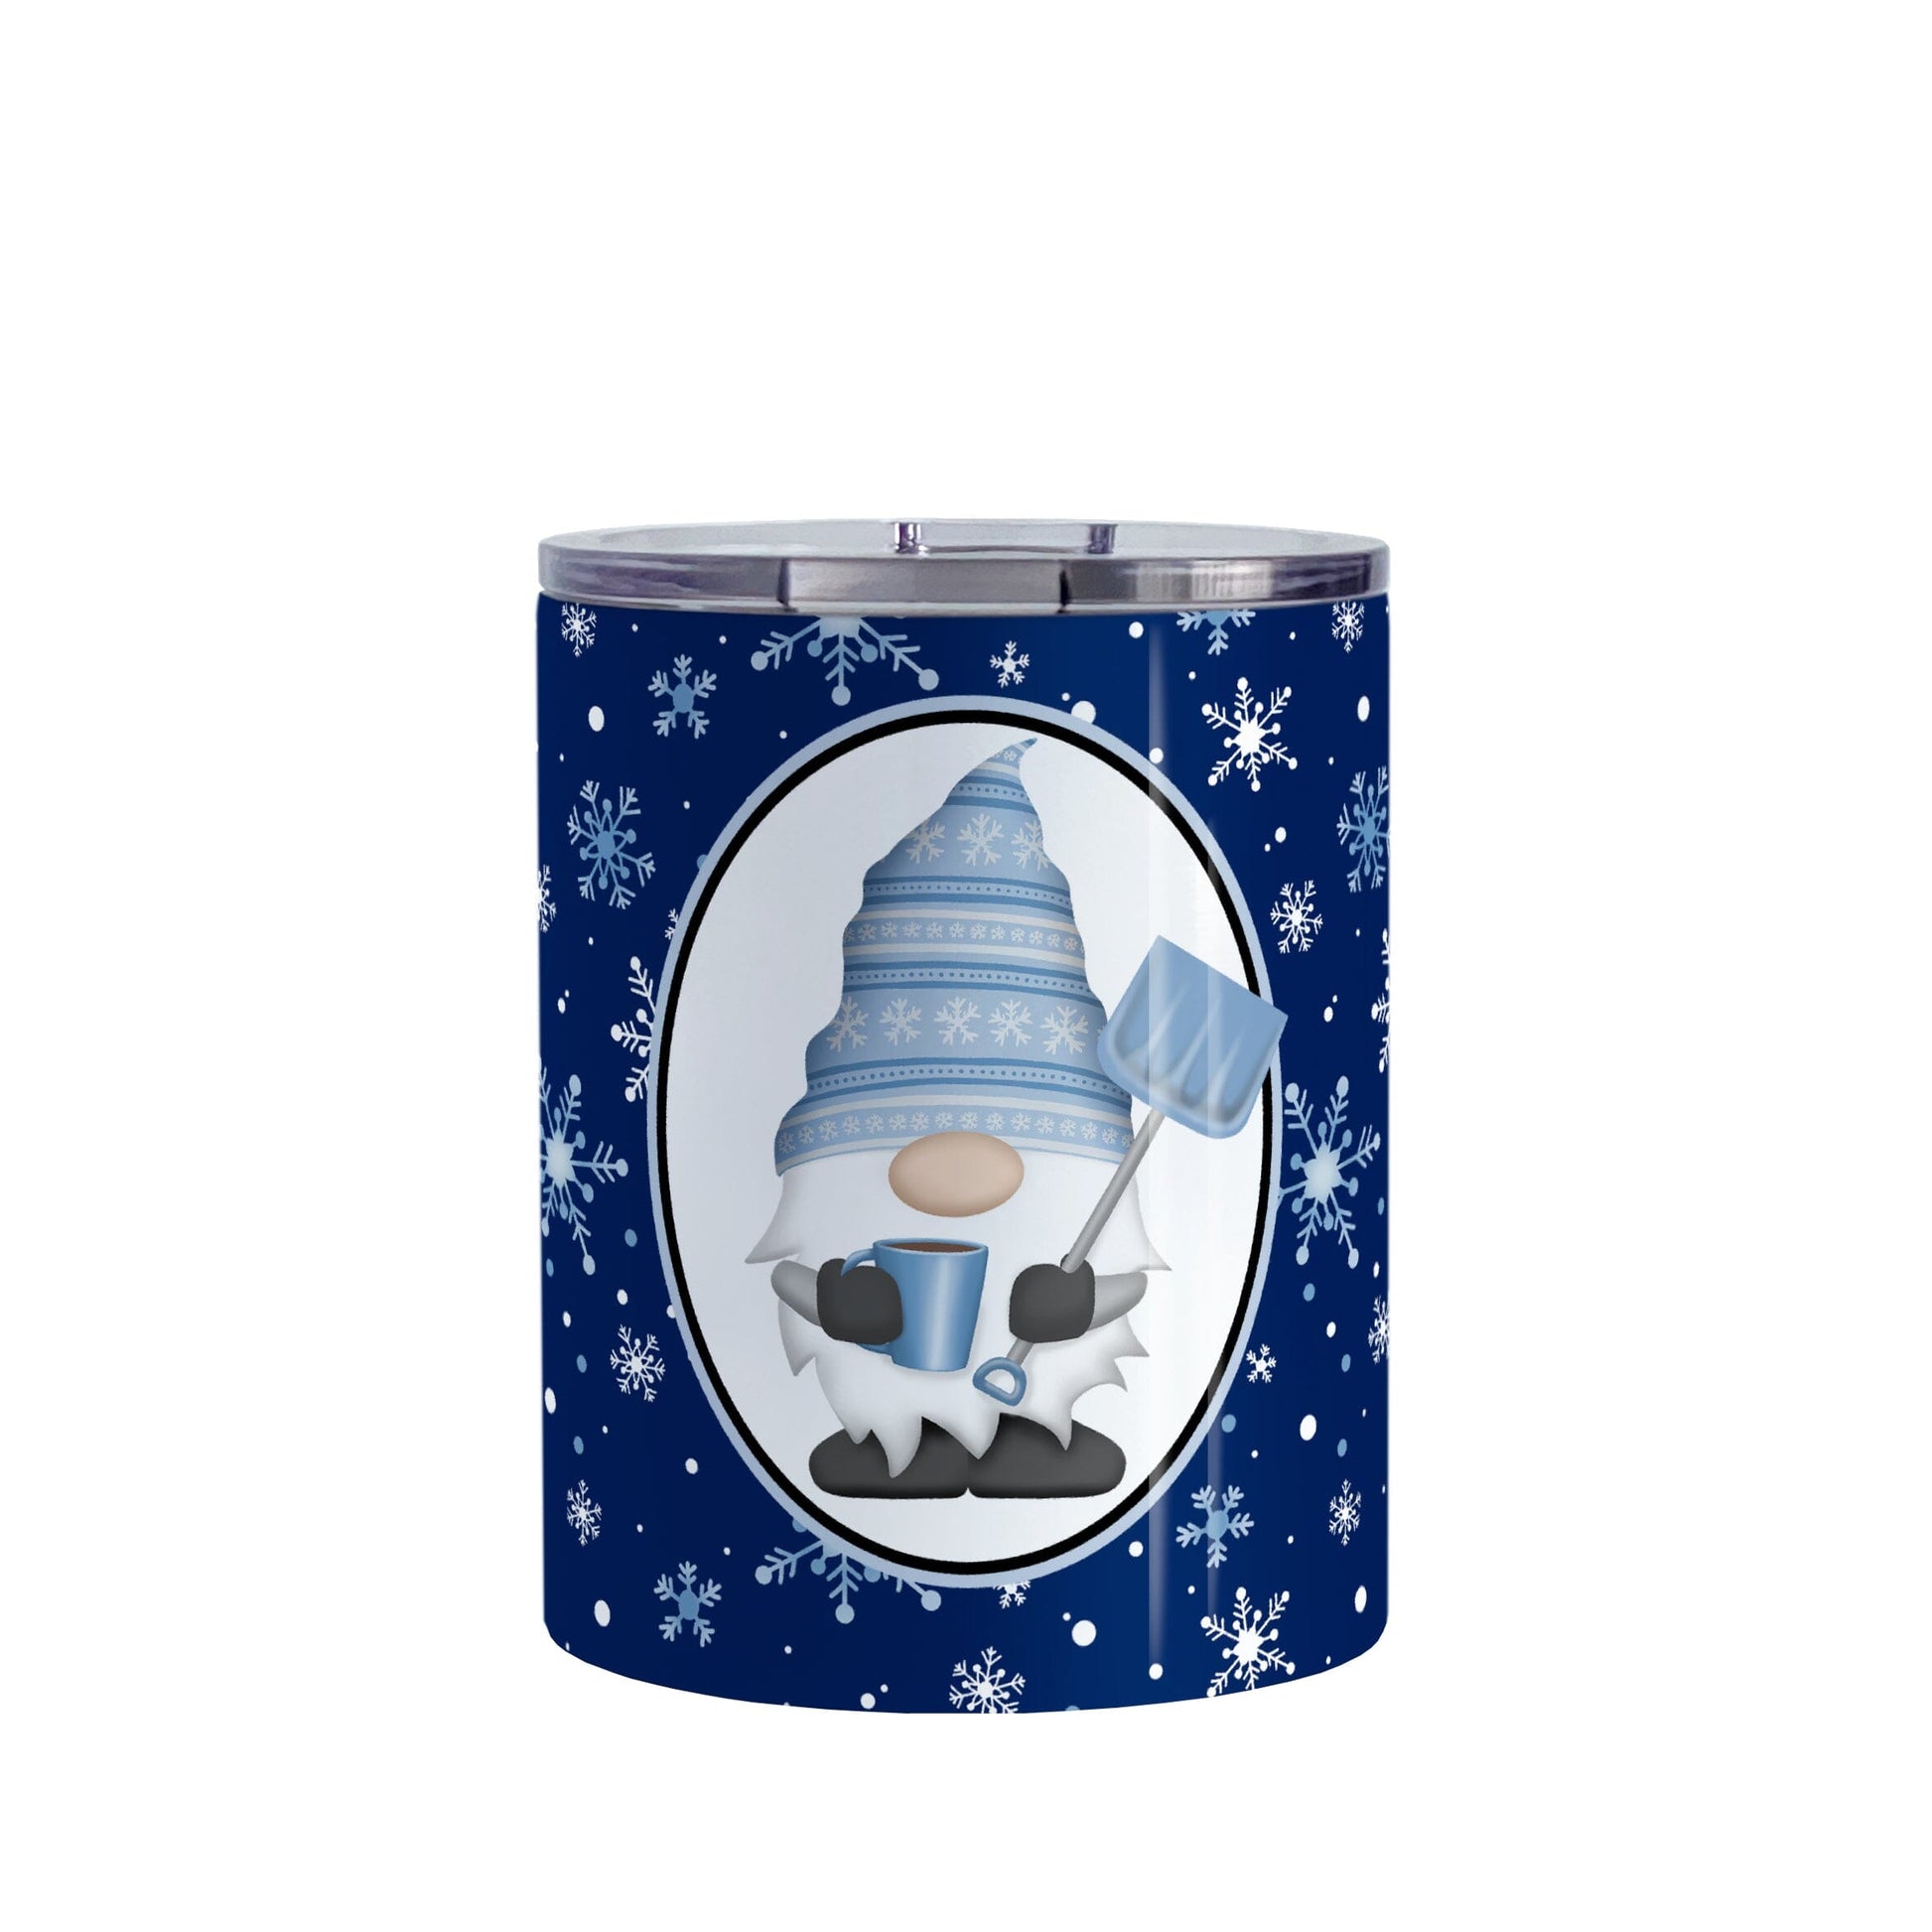 Blue Gnome Snowflakes Tumbler Cup (10oz) at Amy's Coffee Mugs. A stainless steel tumbler cup designed with an adorable gnome wearing a festive blue winter hat and holding a hot beverage and a snow shovel in a white oval over a blue night snowflakes background that wraps around the cup.